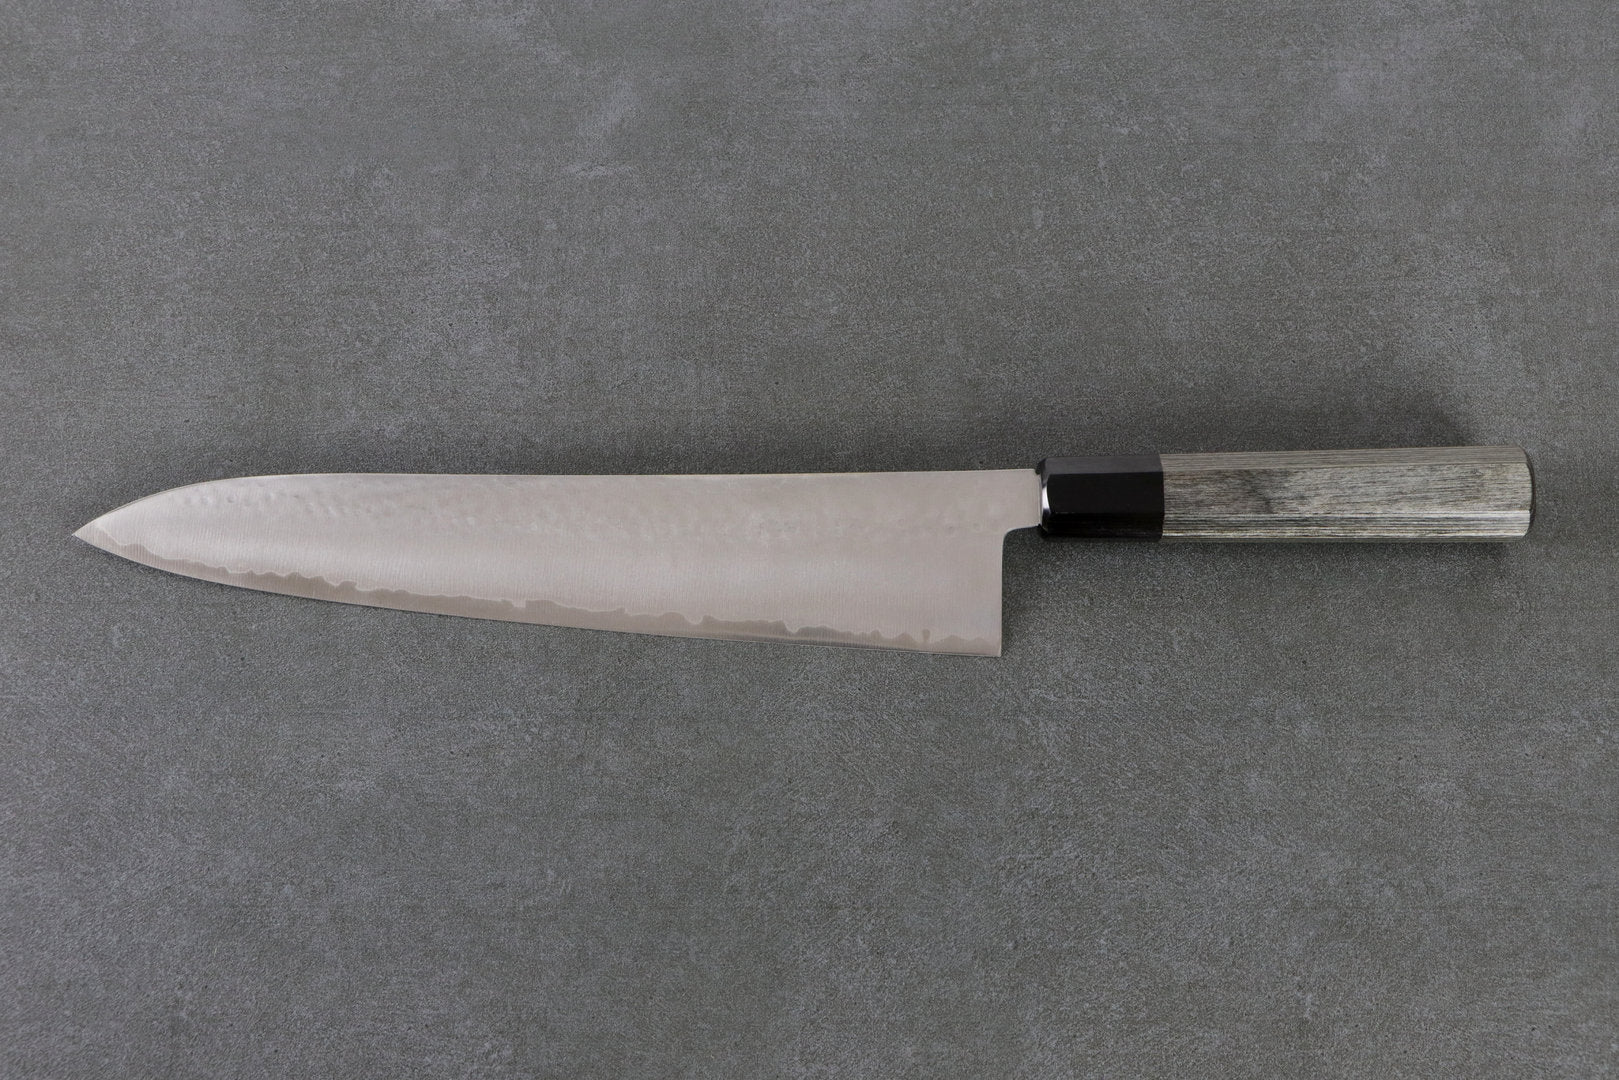 Gyuto 270mm HAP40 Silverback - Tsuchime finished, Complite handle gray